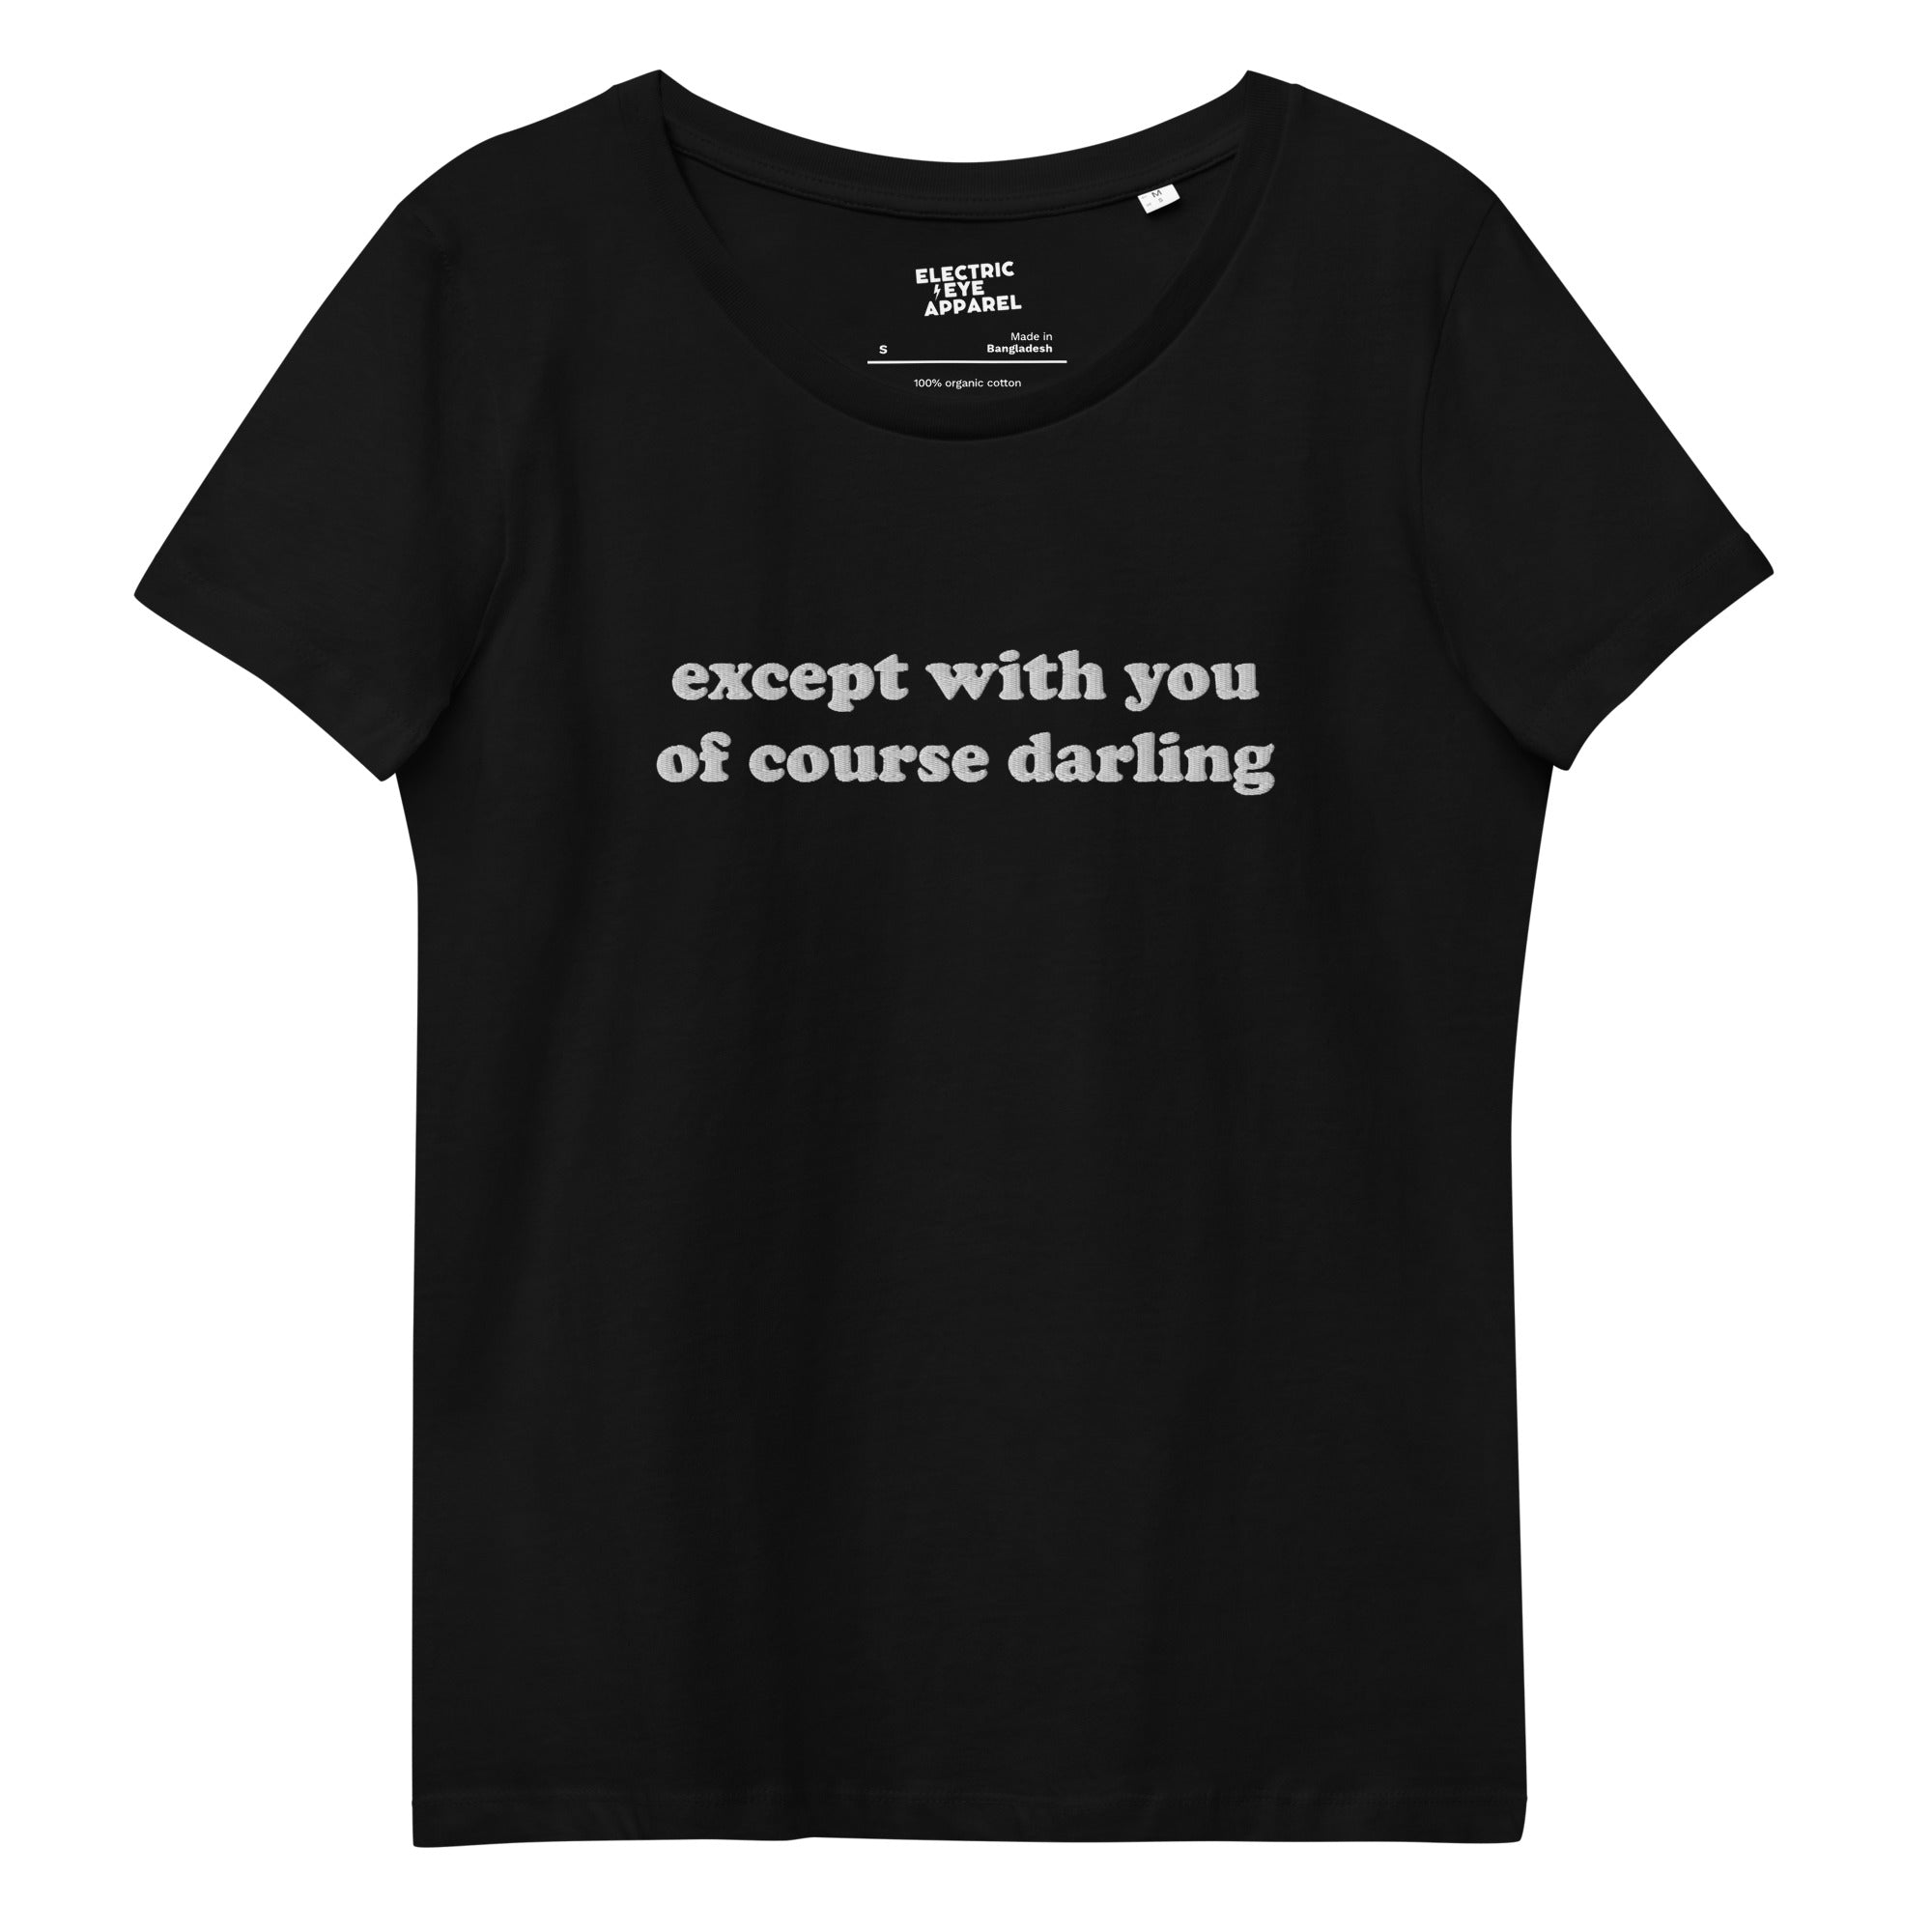 Except With You Of Course Darling - Embroidered Women's fitted organic t-shirt, inspired by Noel Gallagher